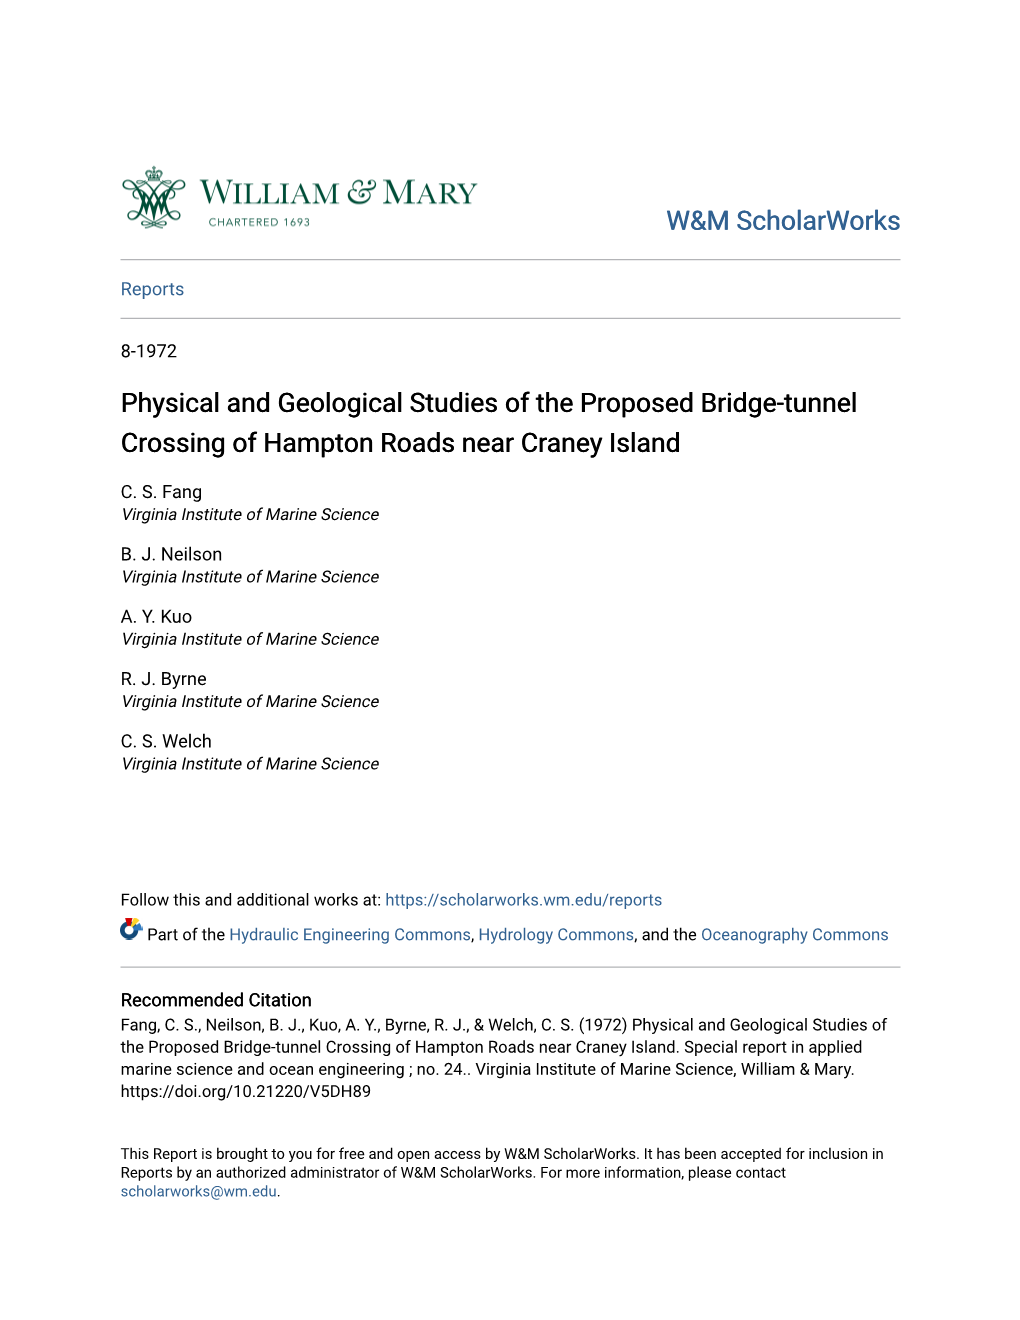 Physical and Geological Studies of the Proposed Bridge-Tunnel Crossing of Hampton Roads Near Craney Island